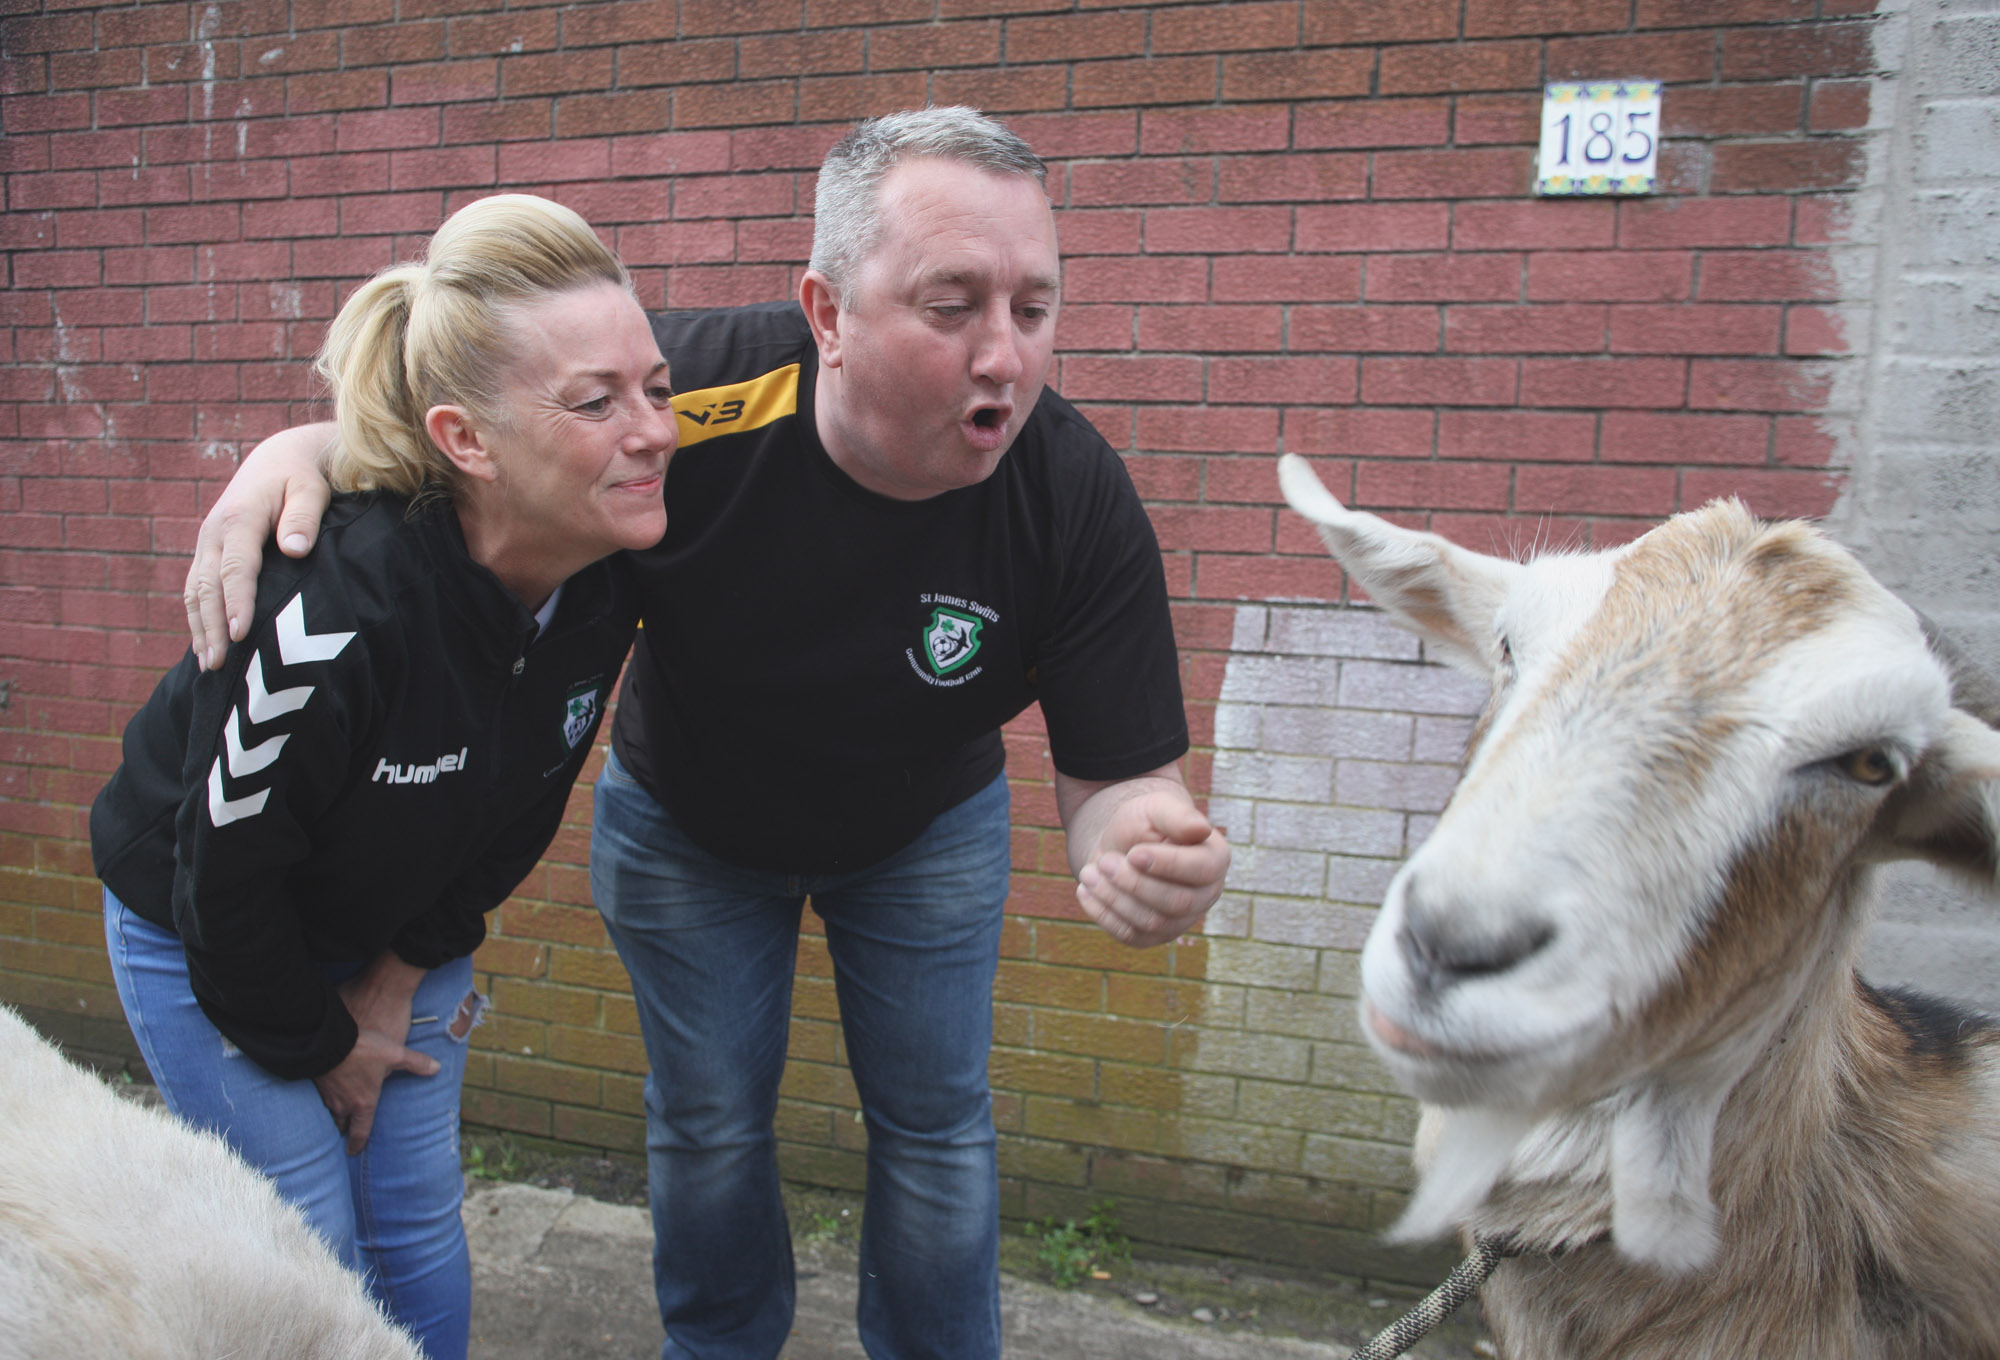 Sinead Reid and Damien Lindsay getting in some practice at St James’ Farm ahead of St James’ Forum’s Strictly Come Dancing 